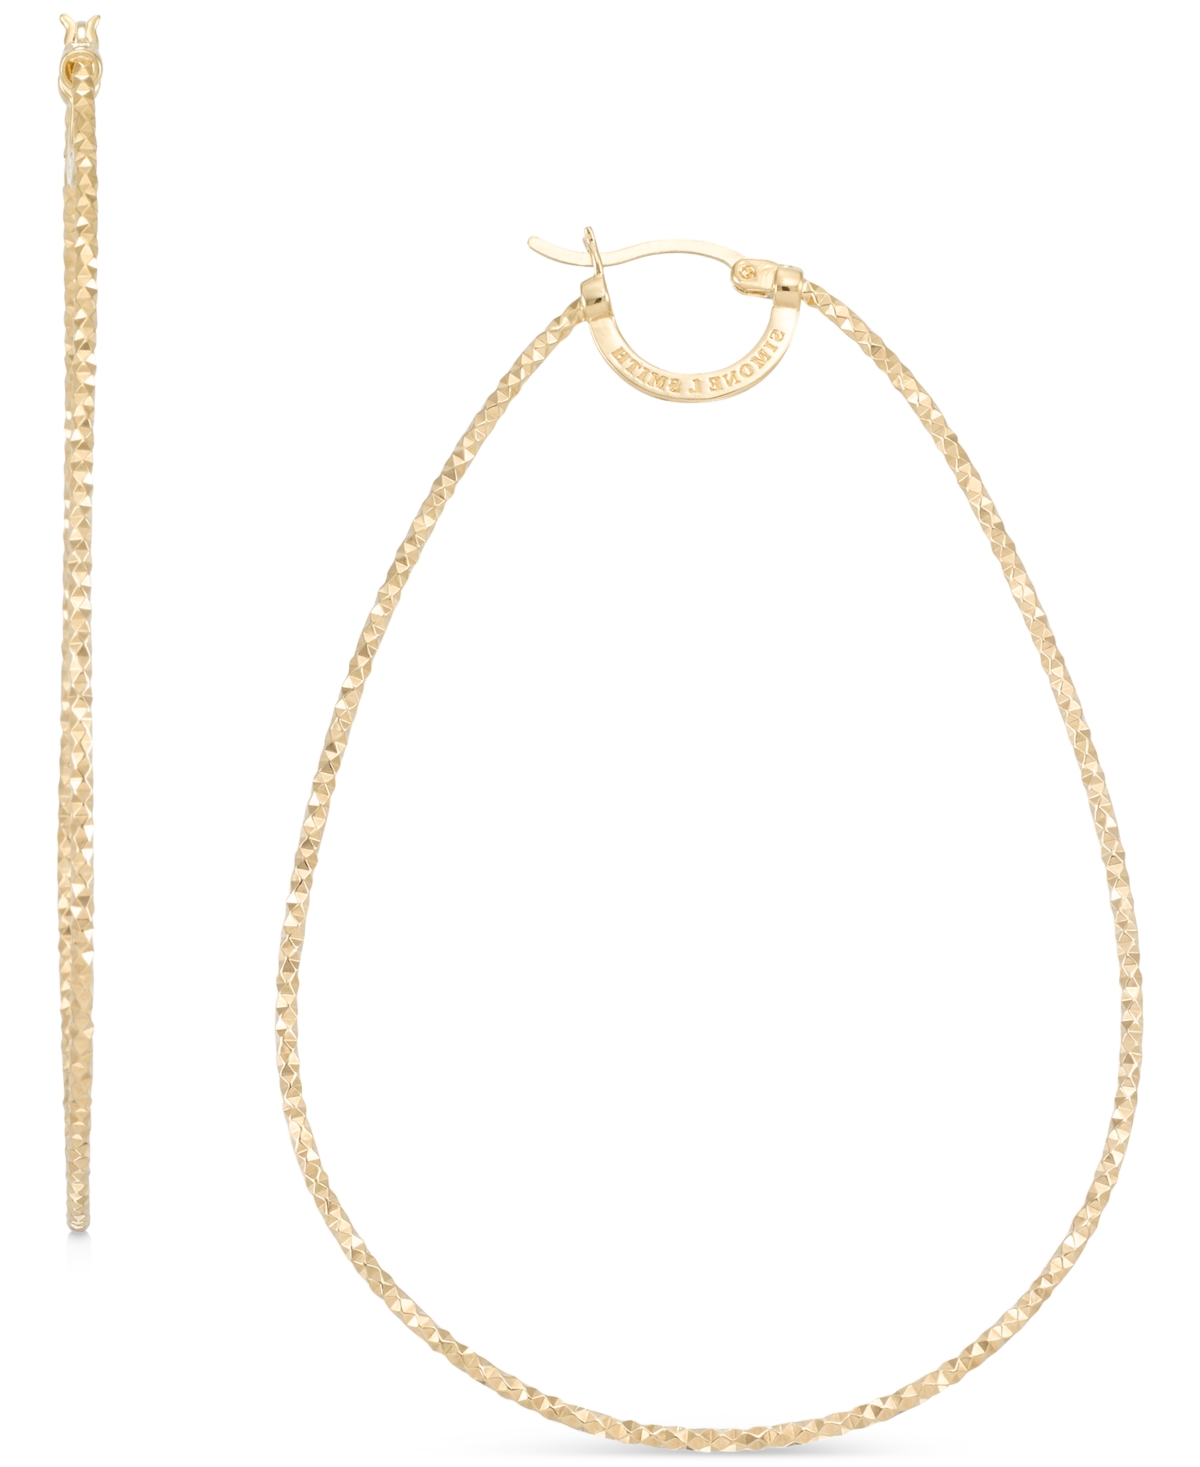 Textured Pear-Shaped Hoop Earrings in 18k Gold-Plated Sterling Silver - Gold Over Silver